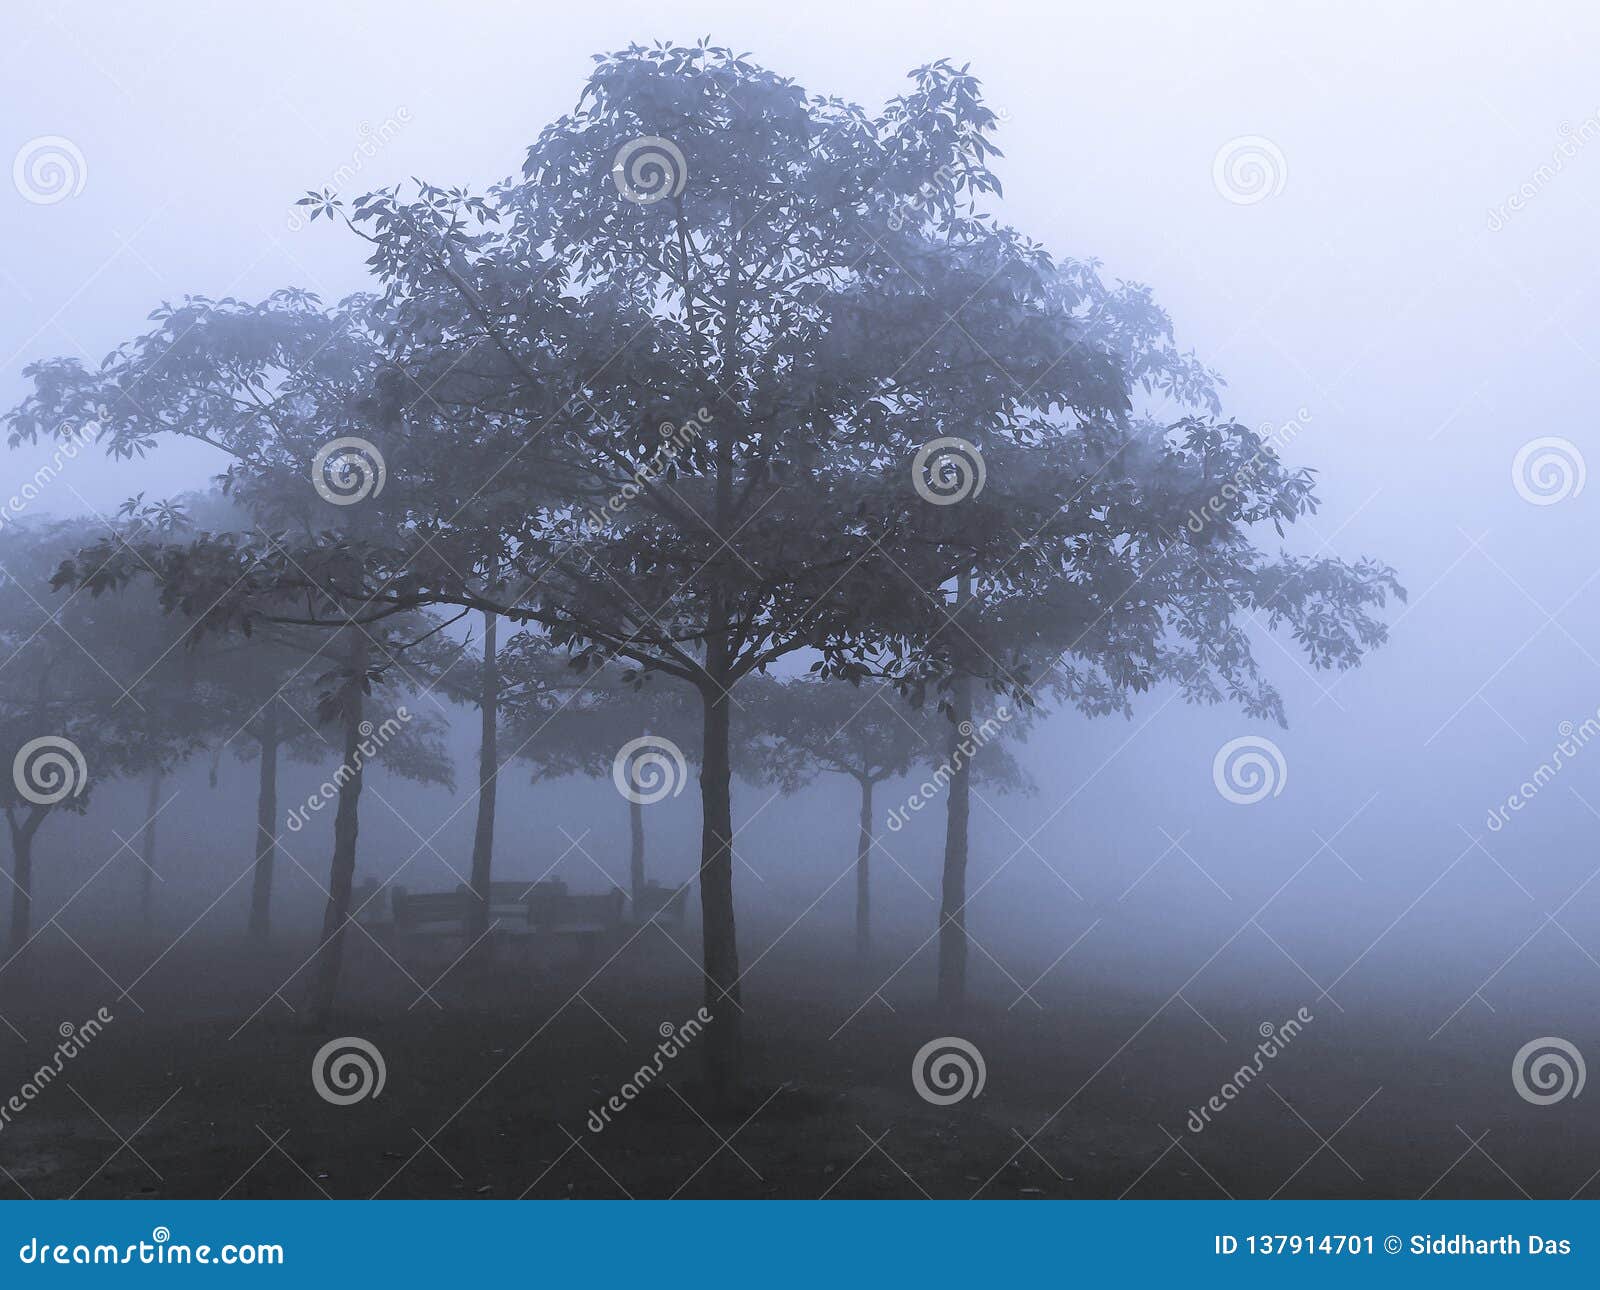 Trees and Branches in Foggy Weather Stock Image - Image of swinging